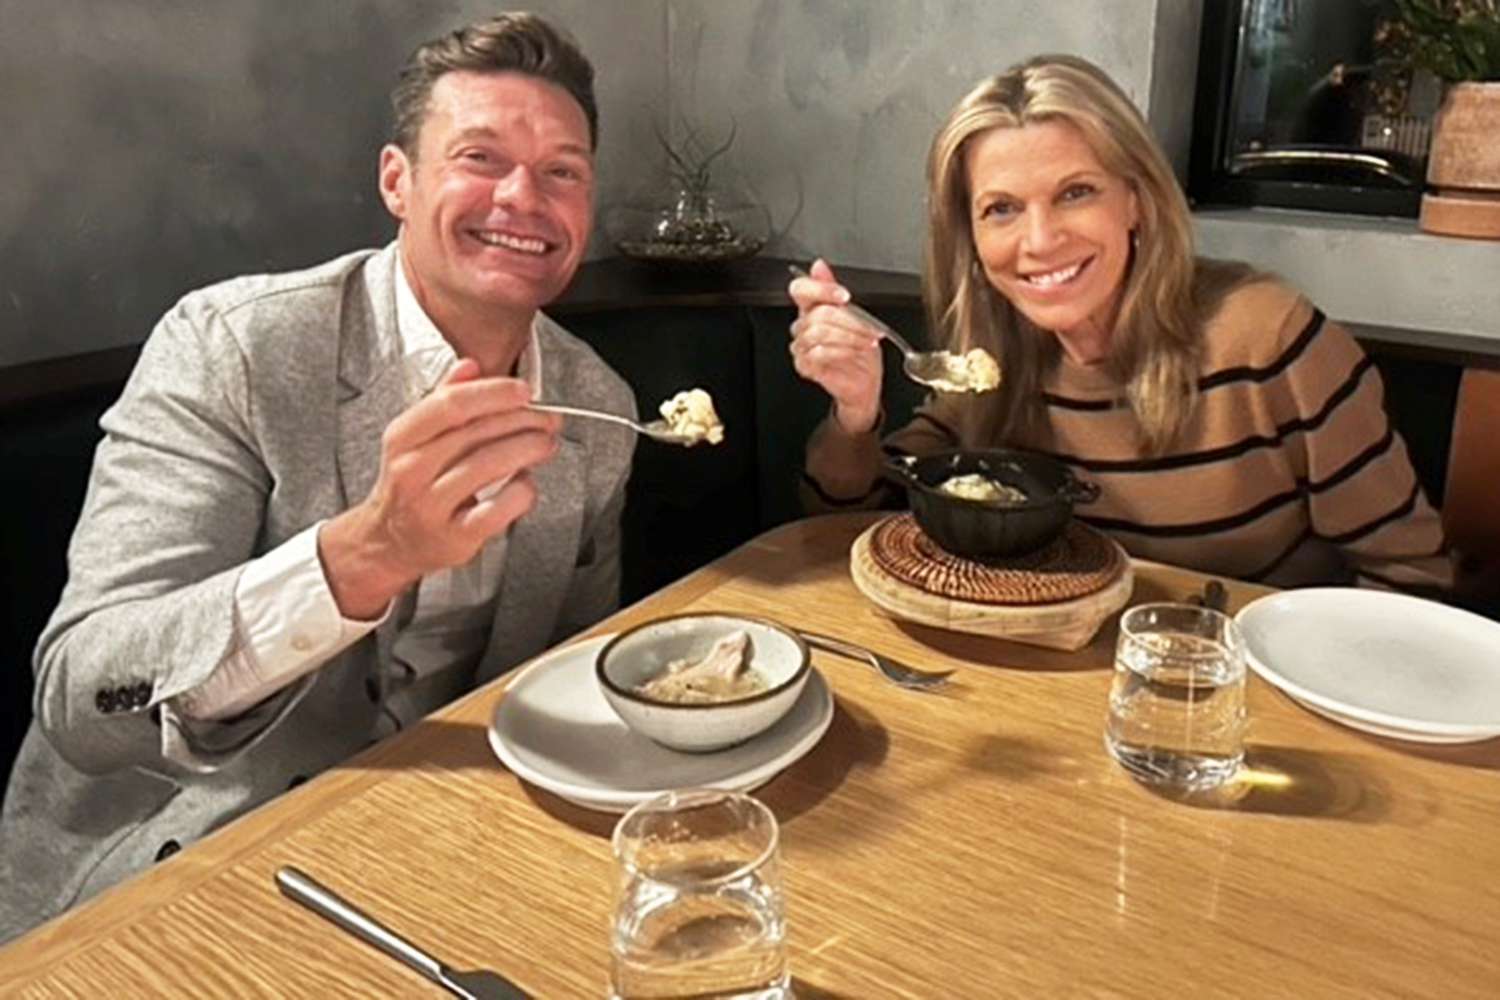 ...Shares Chummy Pic with New 'Wheel of Fortune' Co-Host Ryan Seacrest Ahead of His Debut: 'Friends On and Off Camera'